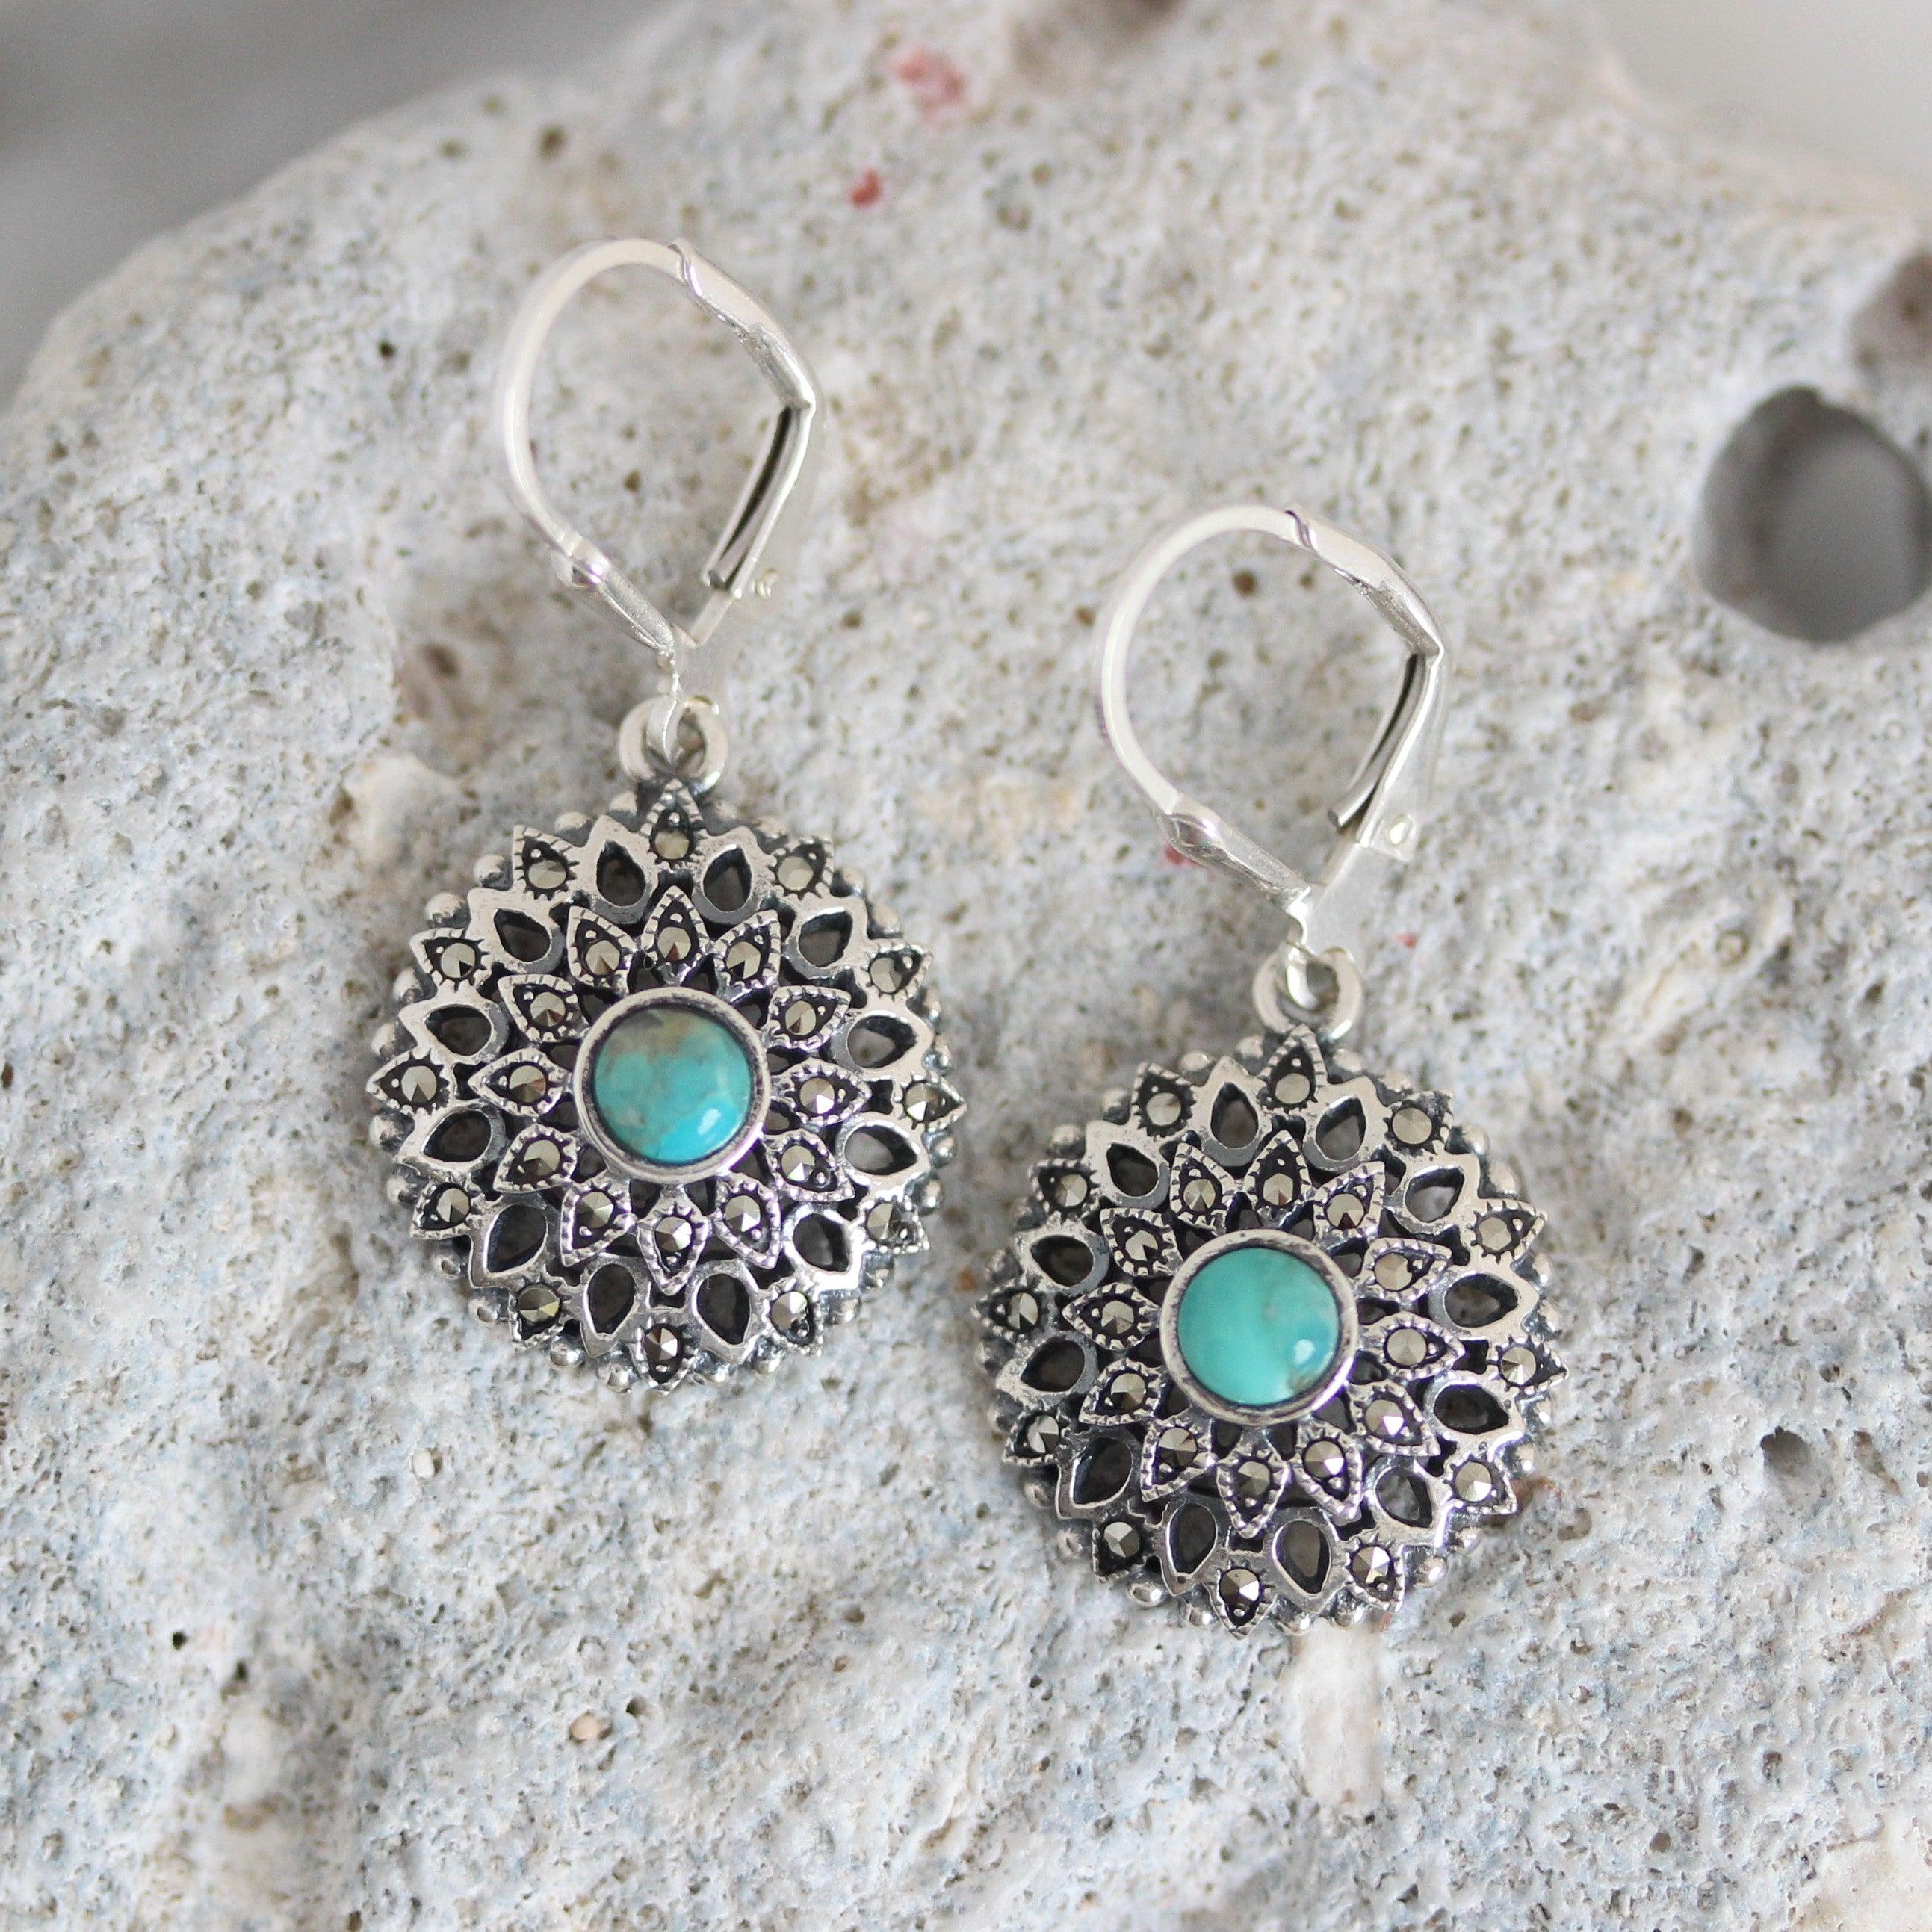 925 Sterling Silver Turquoise Filgree Vintage Style Marcasite Leverback Drop Earrings - STERLING SILVER DESIGNS